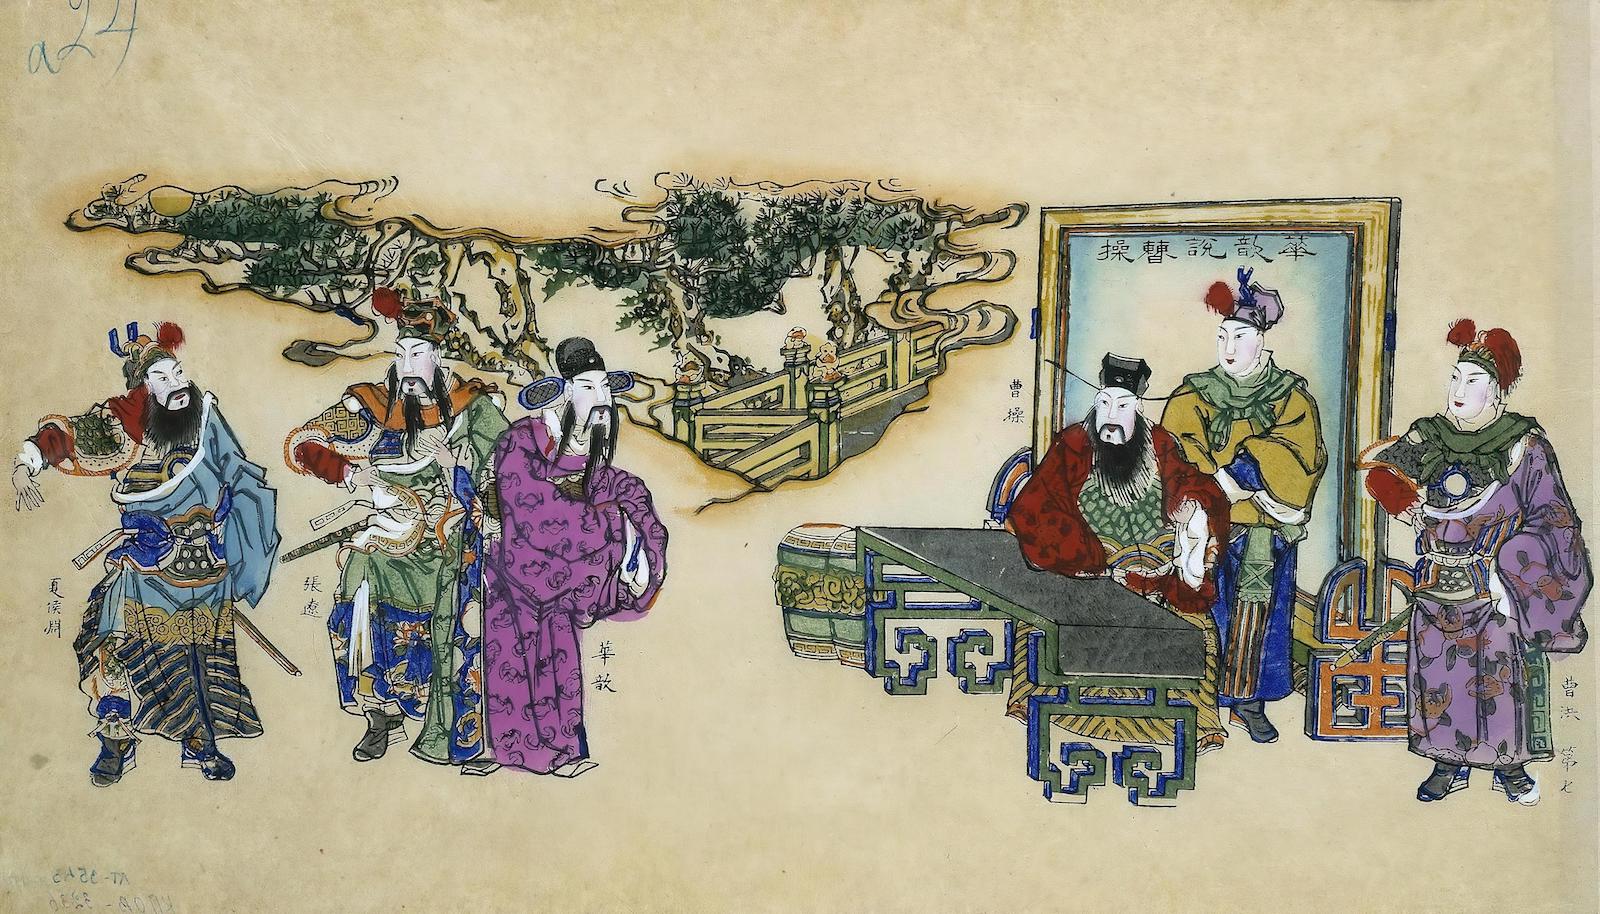 Chinese warlord Cao Cao – who wrote one of the earliest military commentaries to Sun Tzu’s Art of War – meeting with politician Hua Xin, Chinese, late 19th-early 20th century.